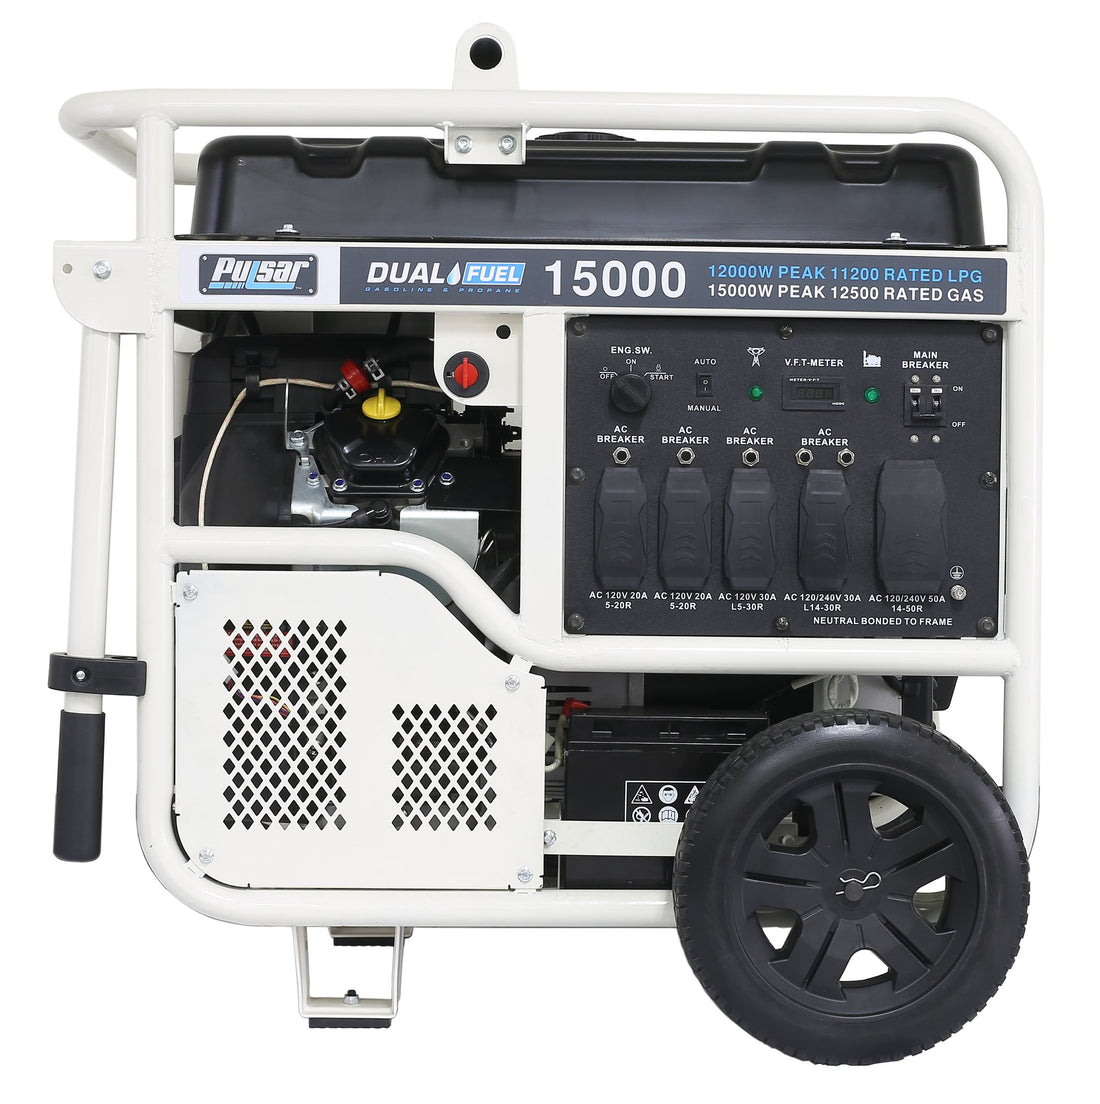 5 Tips about Portable Generators from the Industry Experts that will get you started!